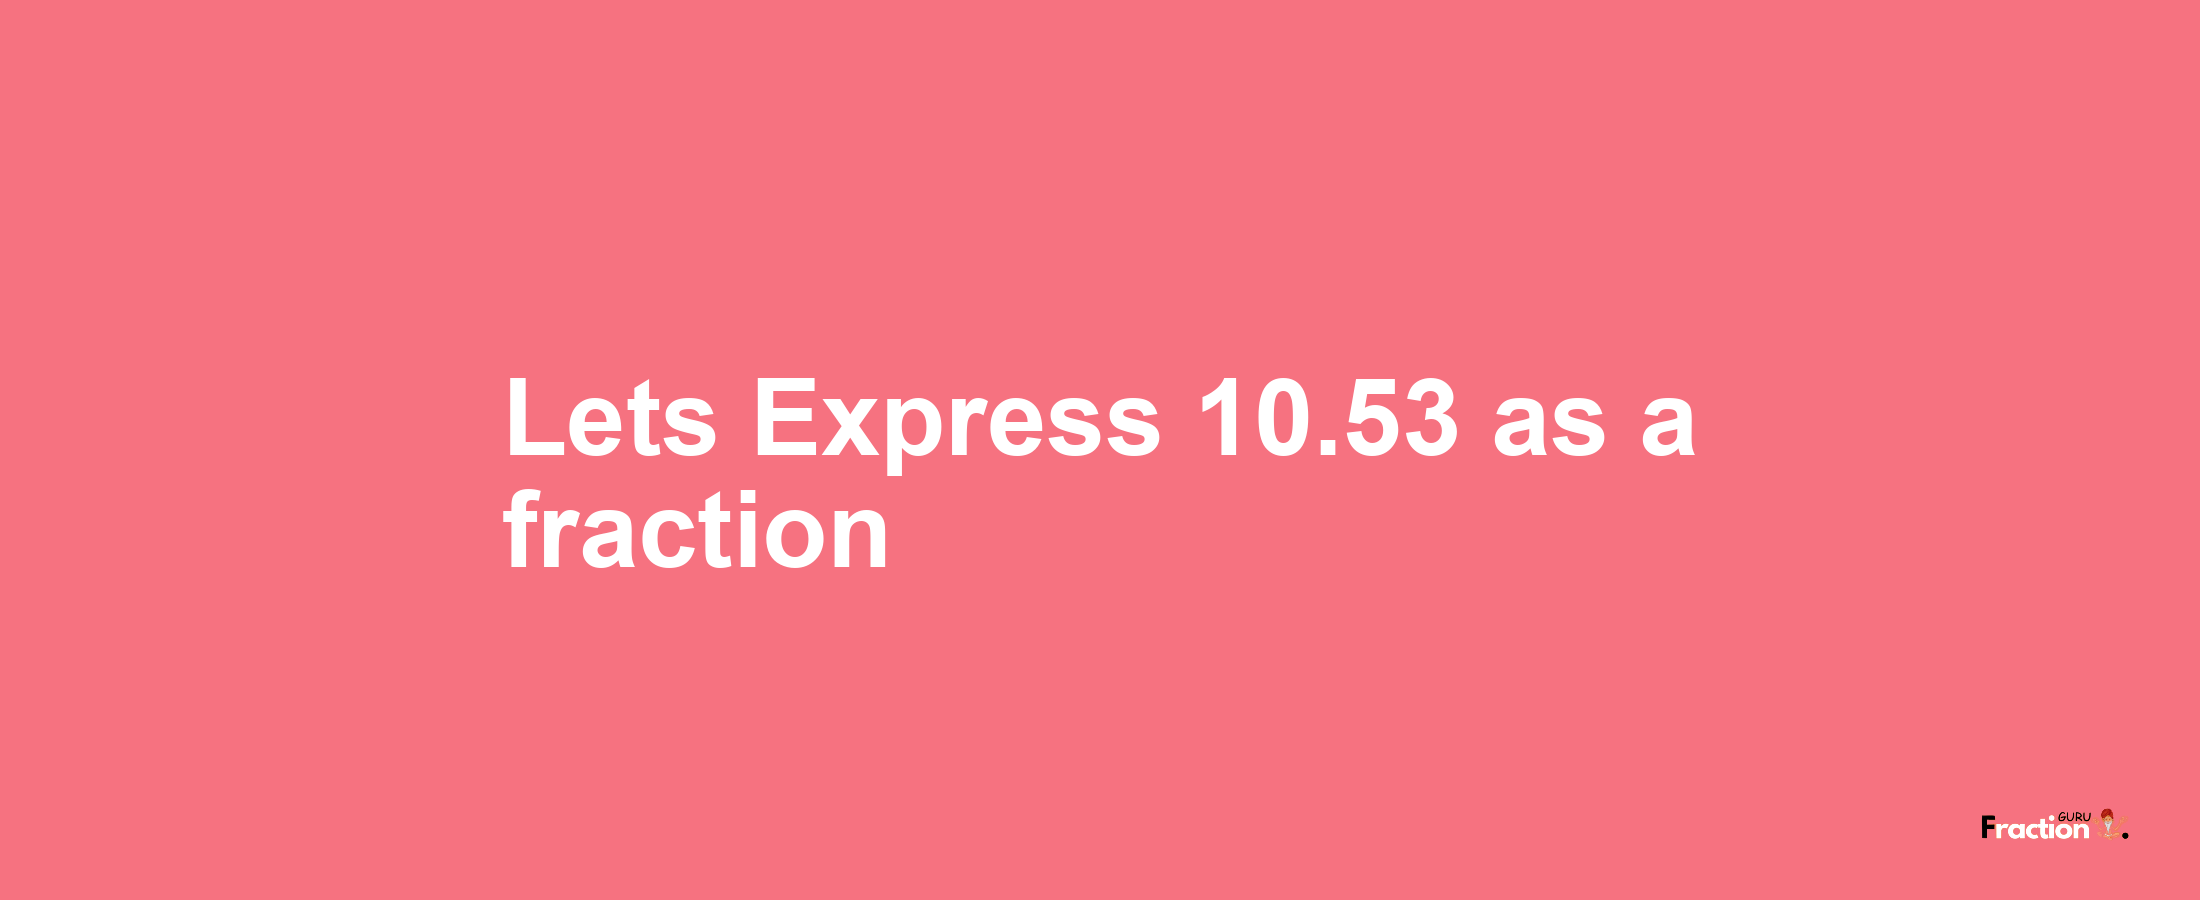 Lets Express 10.53 as afraction